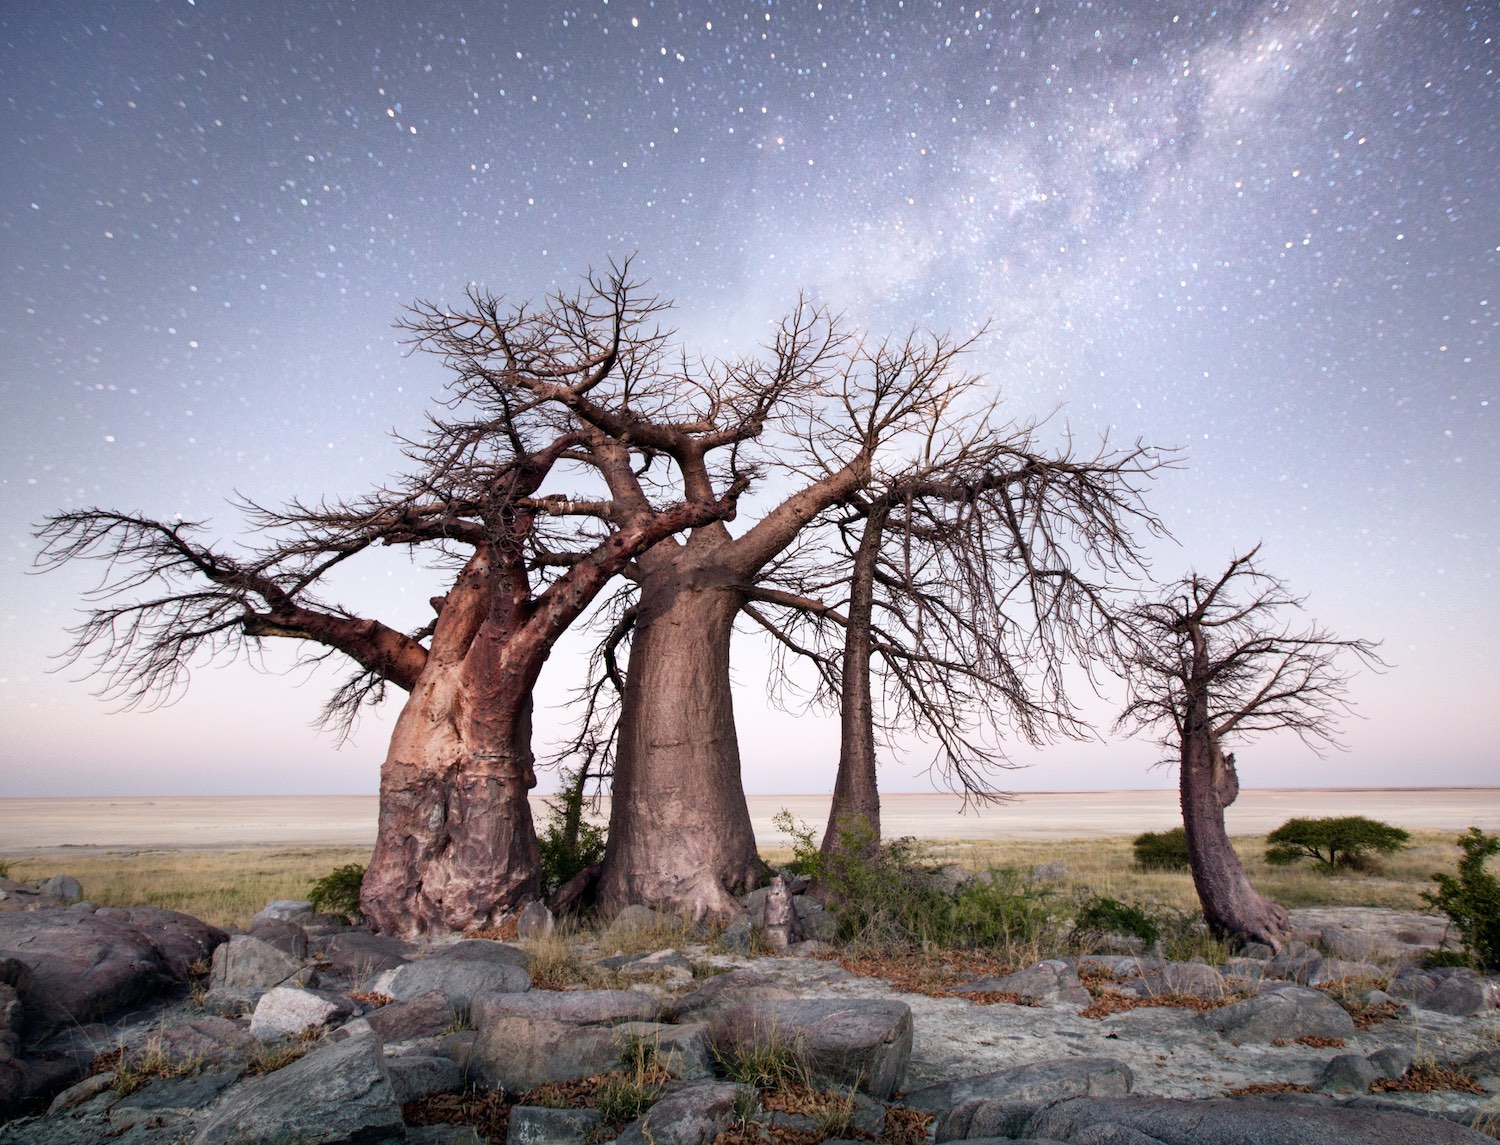 baobab tree - facts about africa